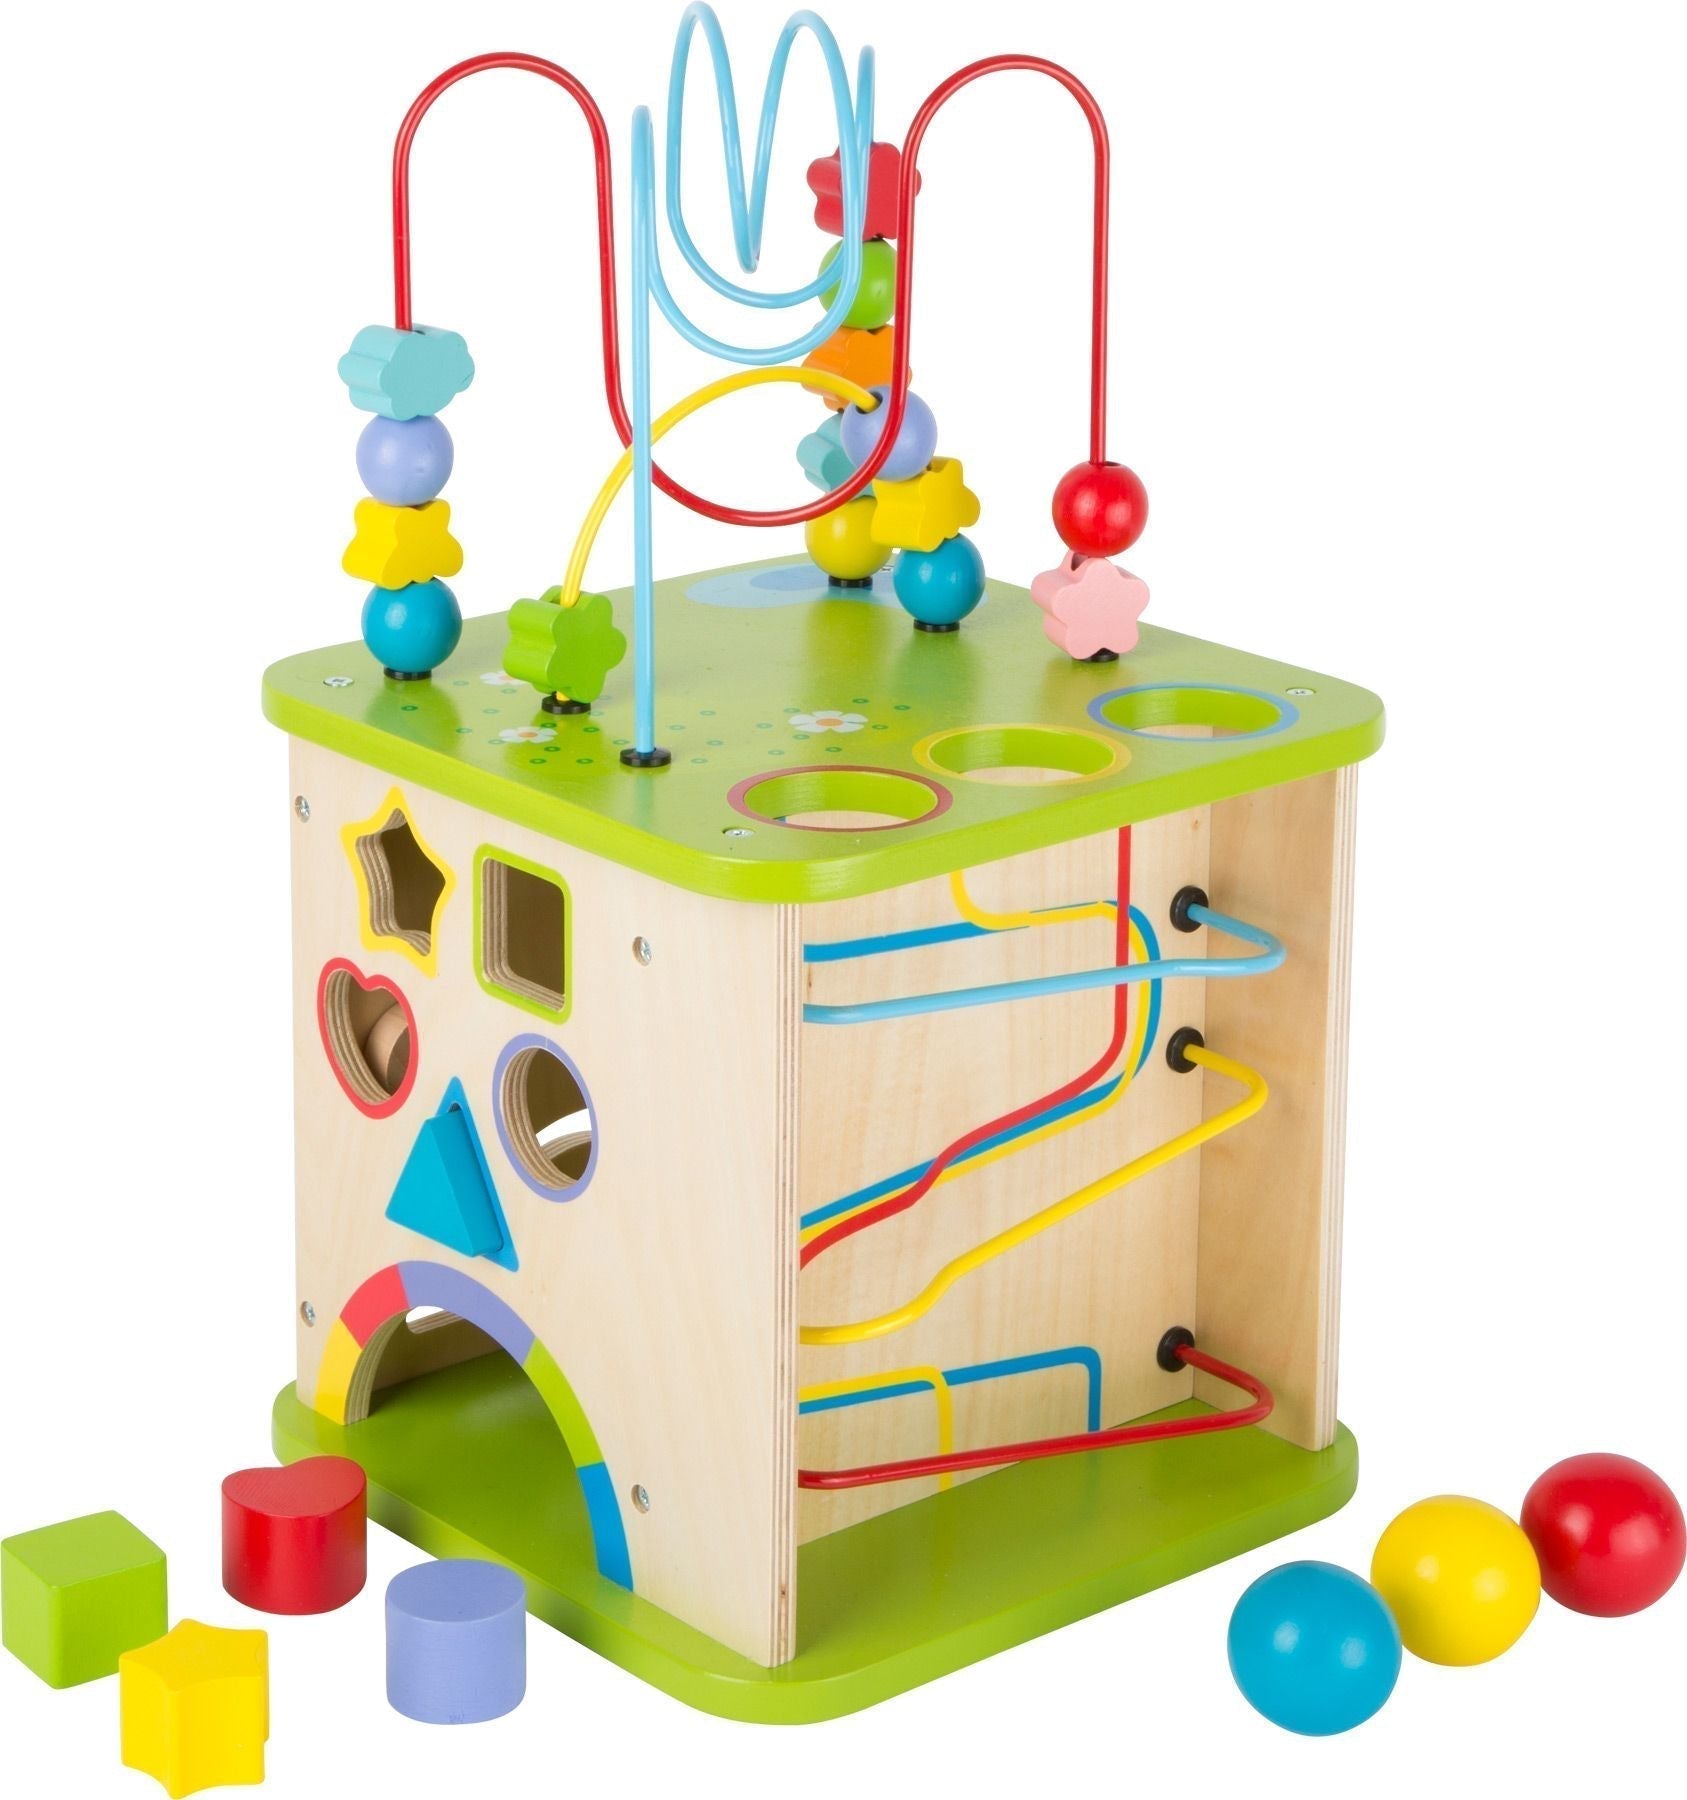 Motor Skills World with Marble Run, The game world of the little ones is very big! Many wonderful playtime ideas are brought together in this stable wooden cube - in addition to shapes for inserting and a string threading game, there is a marble run, a coordination game to learn numbers, and a wall of gears integrated into the cube. The entire set intensively trains motor skills and understanding of shapes, colors, and physics - but is also a lot of fun! The blocks and balls that are inserted into the cube 